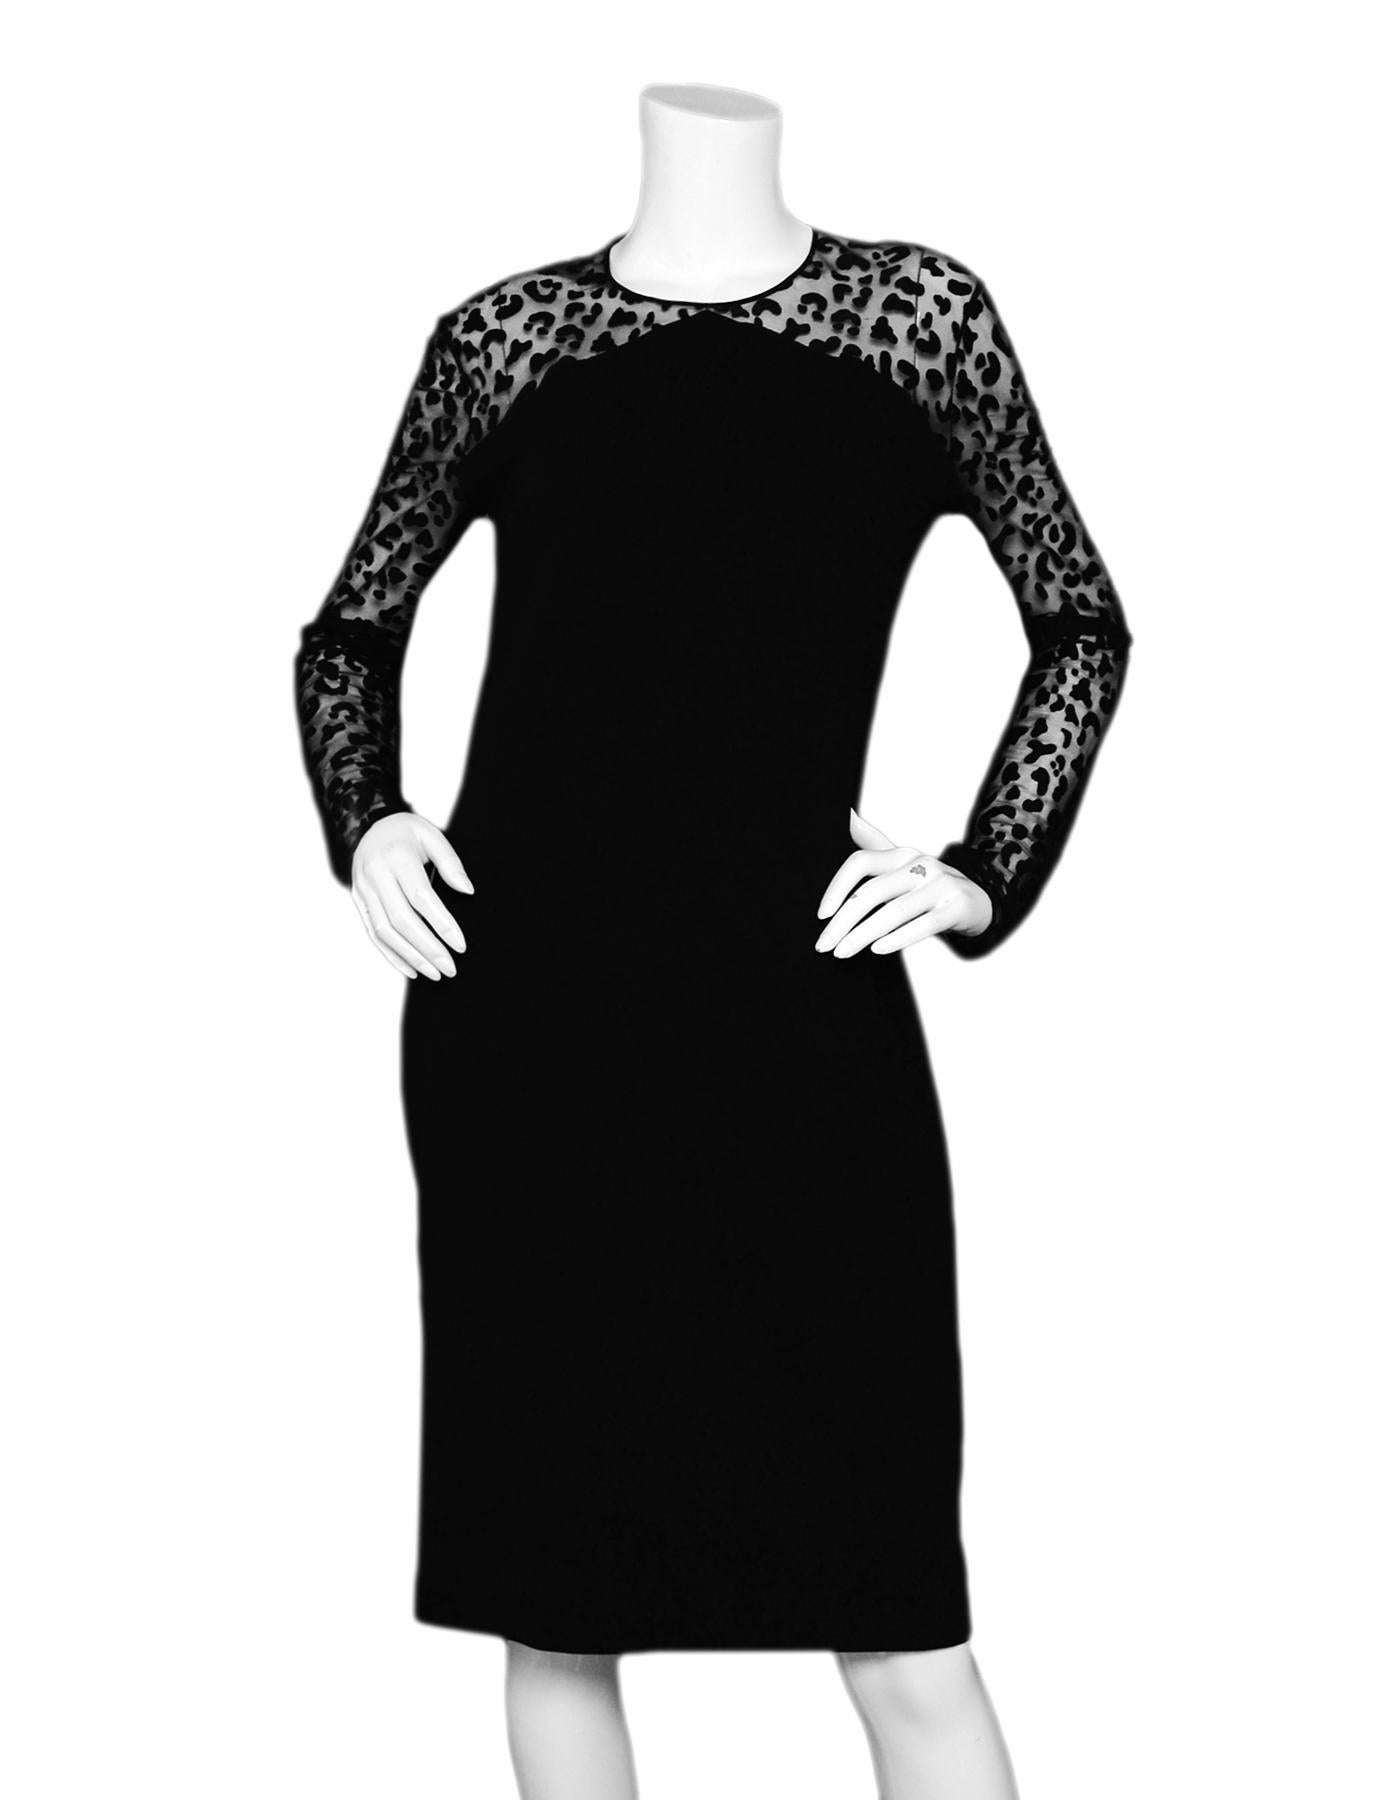 Stella McCartney Black Leopard Chiffon Sleeve Dress sz 48

Made In: Italy
Color: Black 
Materials: 65% rayon, 30% polyamide, 5% elastane. Combo: 70% polyamide, 30% rayon
Opening/Closure: Back hidden zipper
Overall Condition: Excellent pre-owned